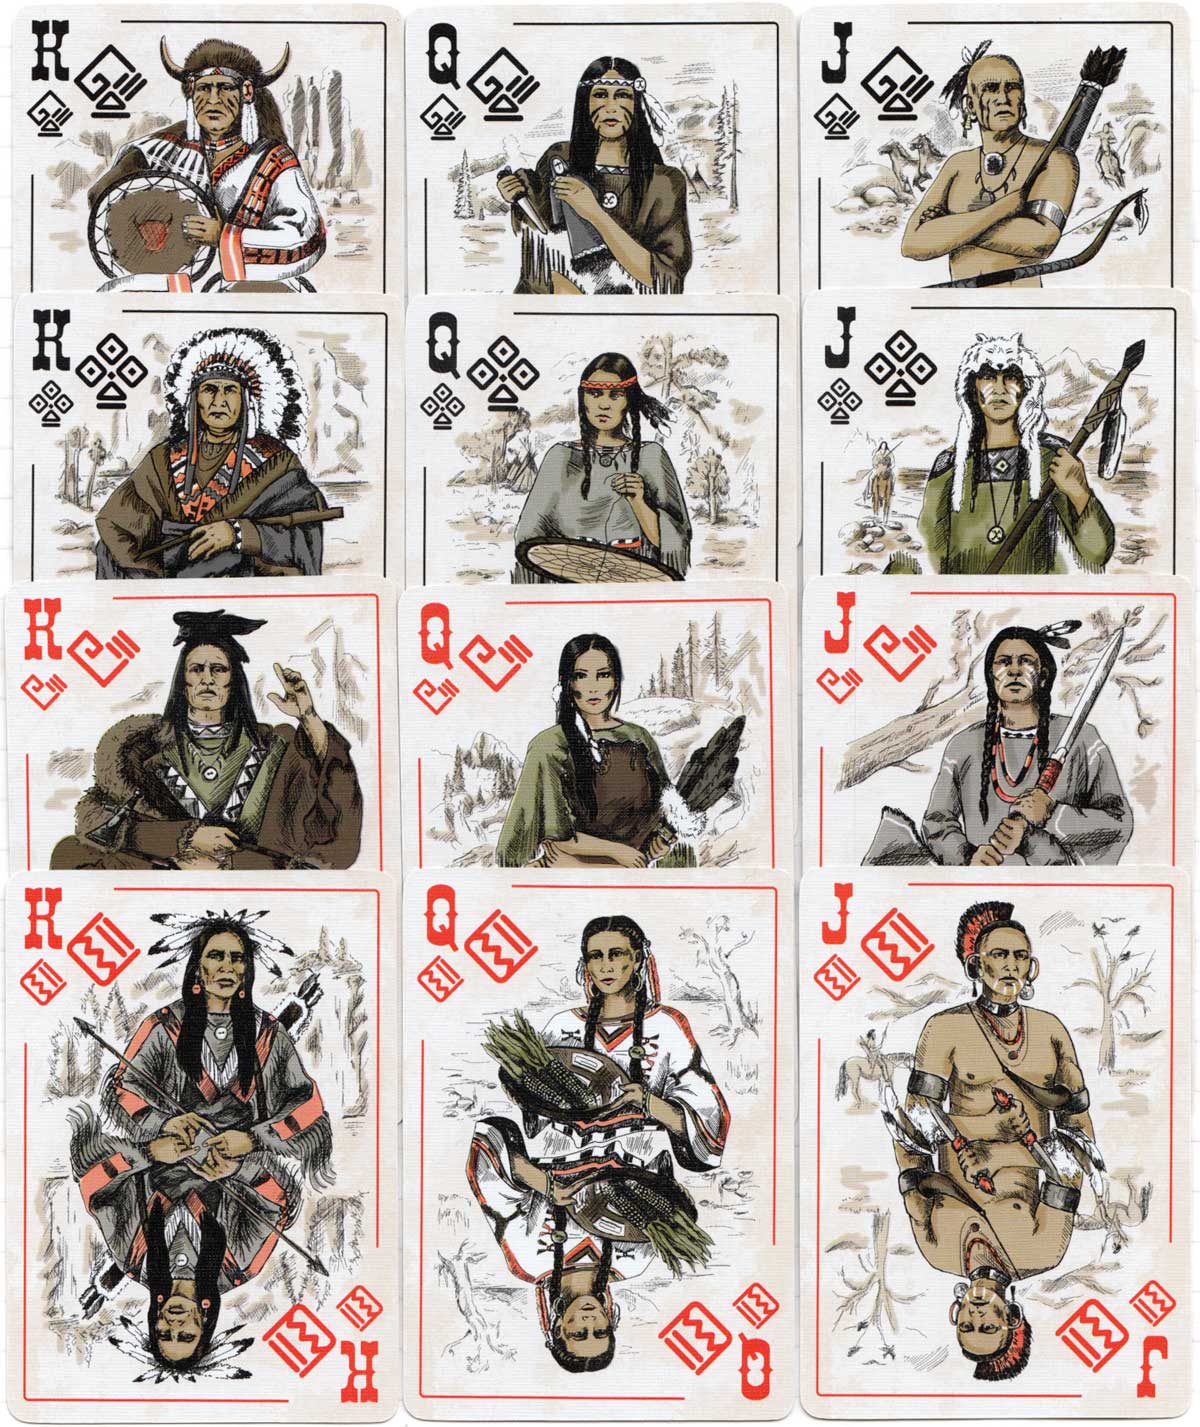 Native American Warriors from the Wild West Series published by SPCC, 2018